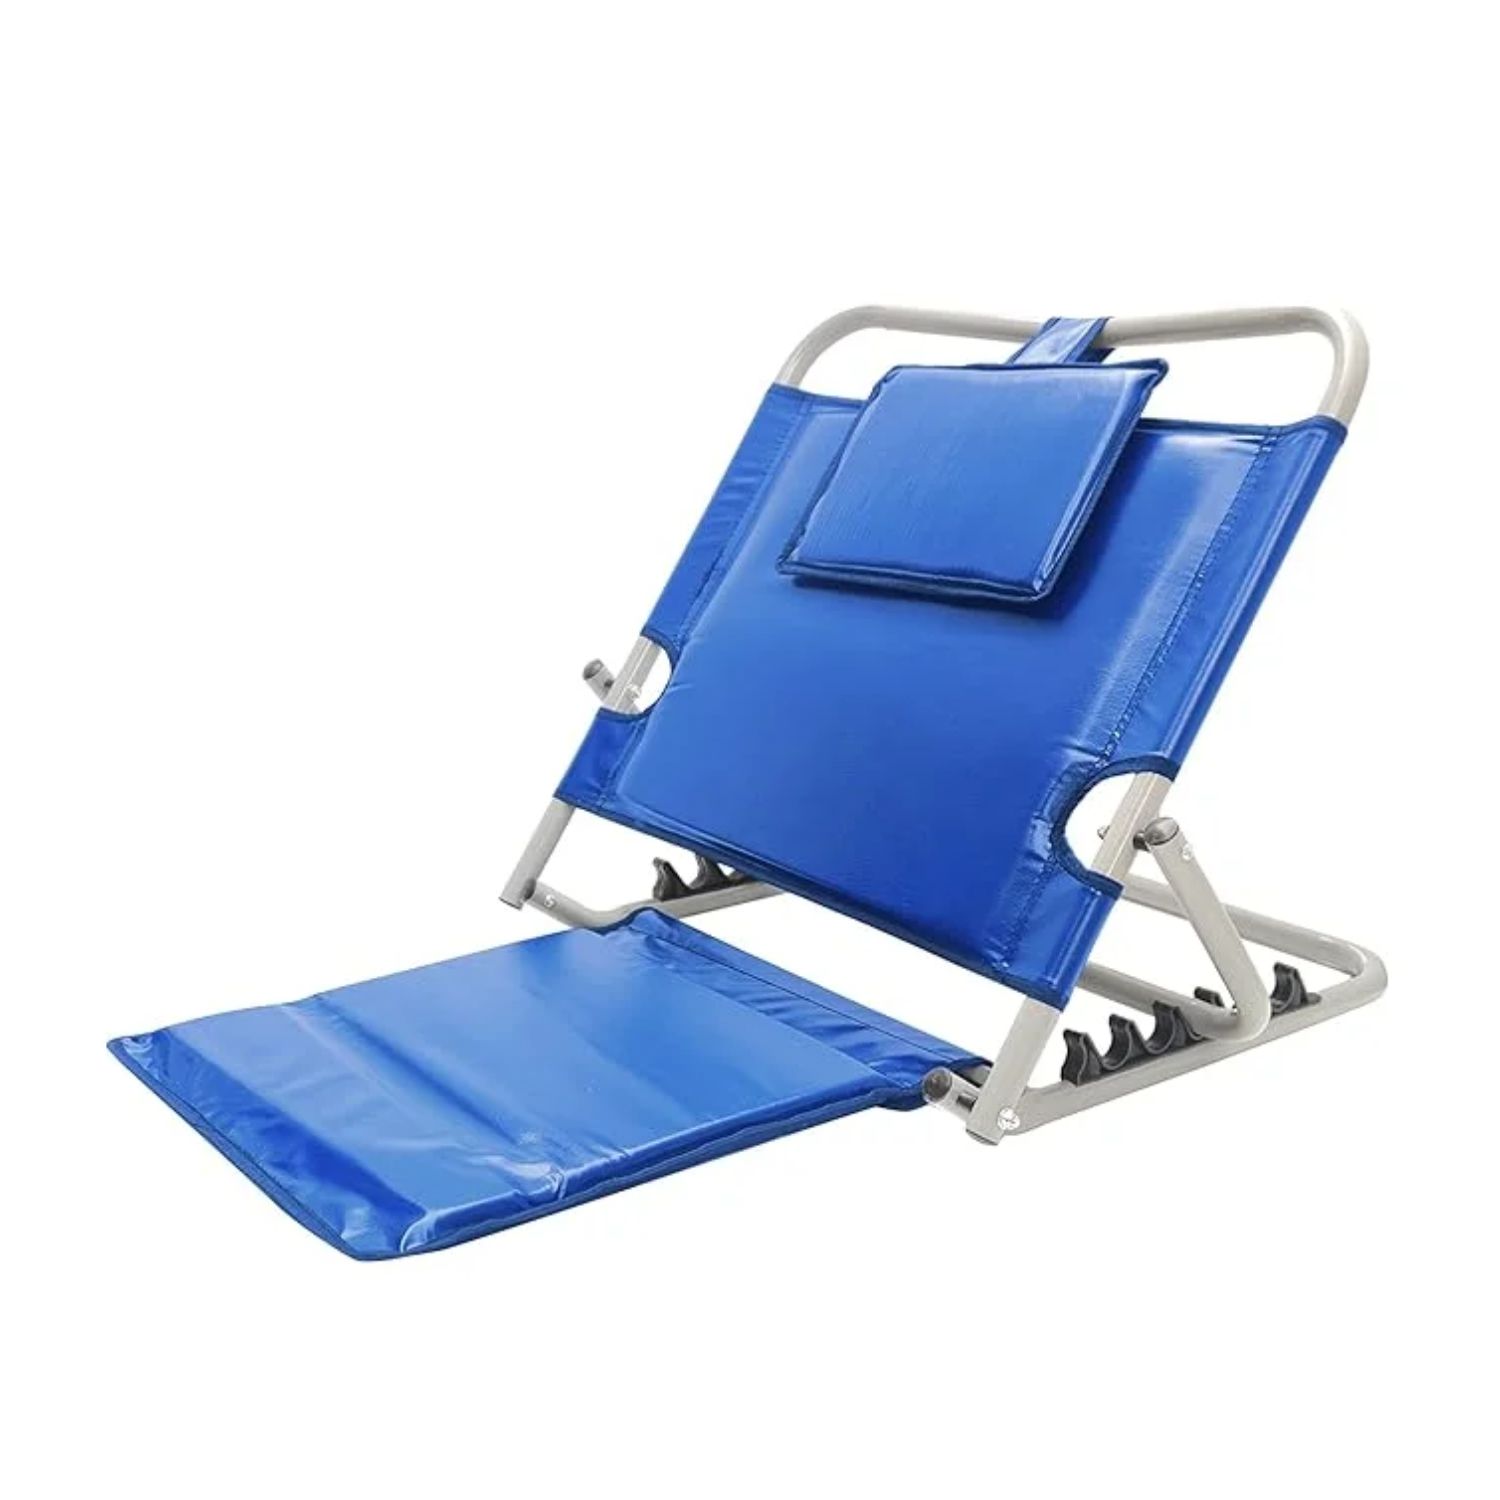 MPS Medical Equipments - Manual Recliner Bed renting solutions at your home care